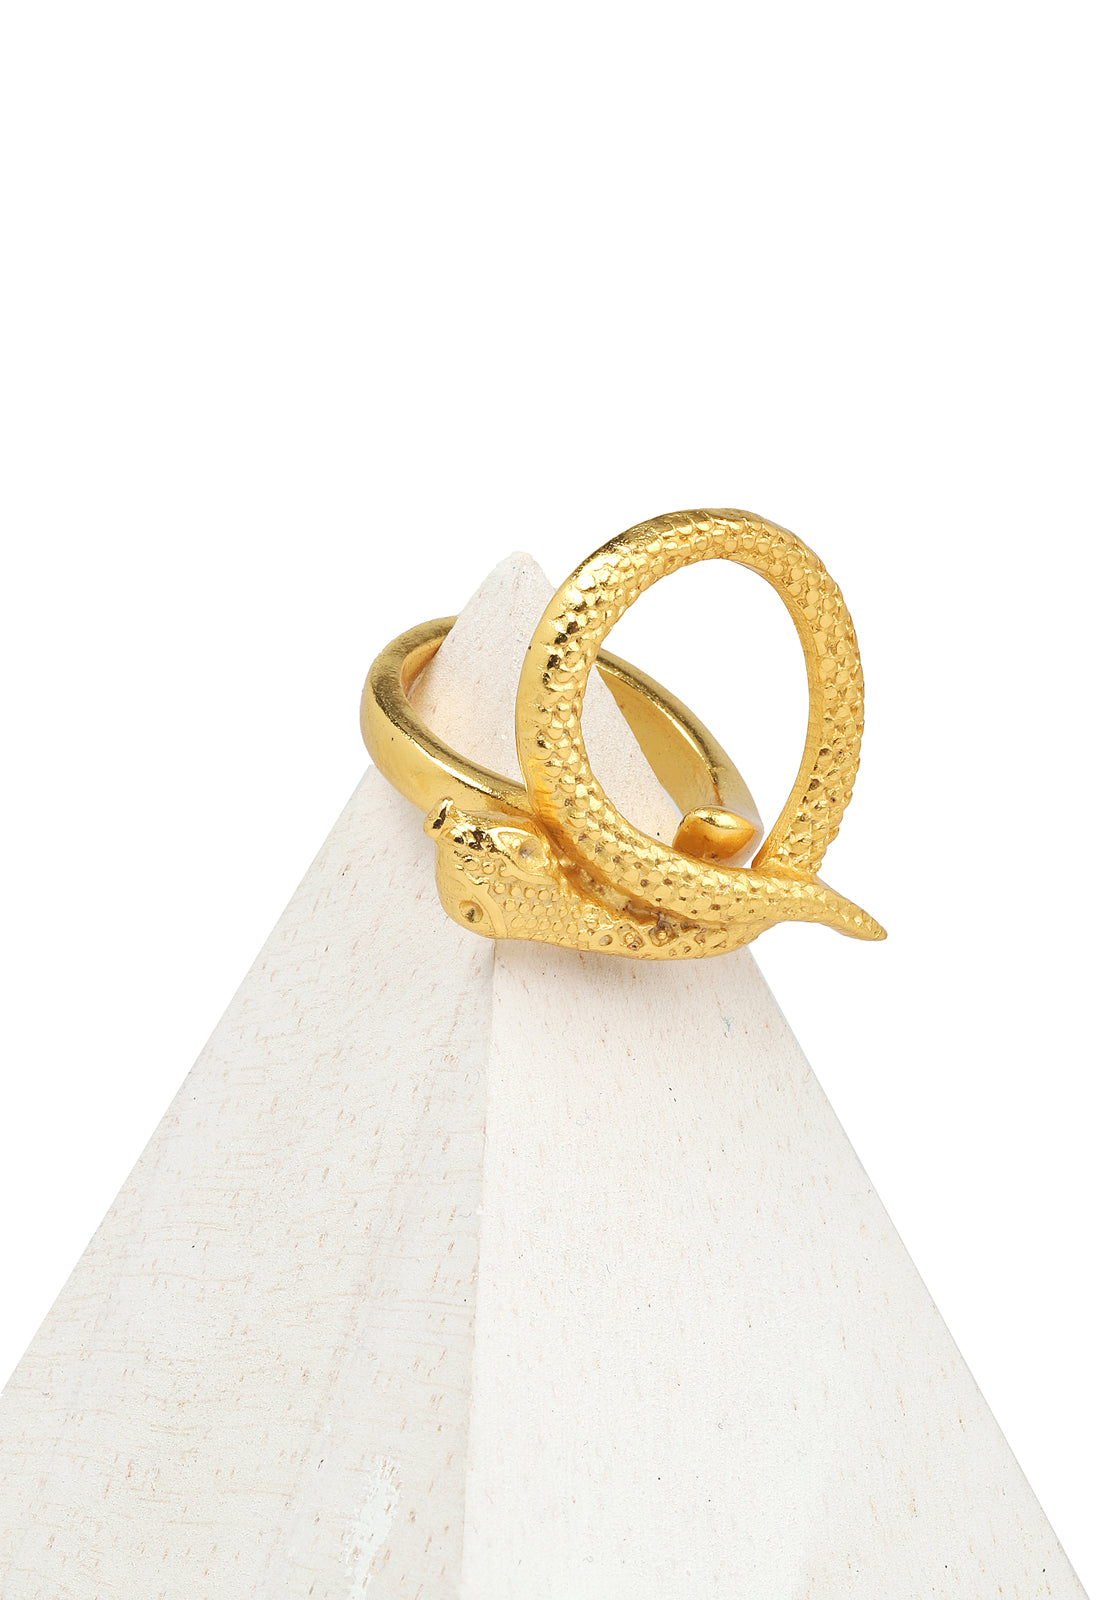 Cscabel Ring